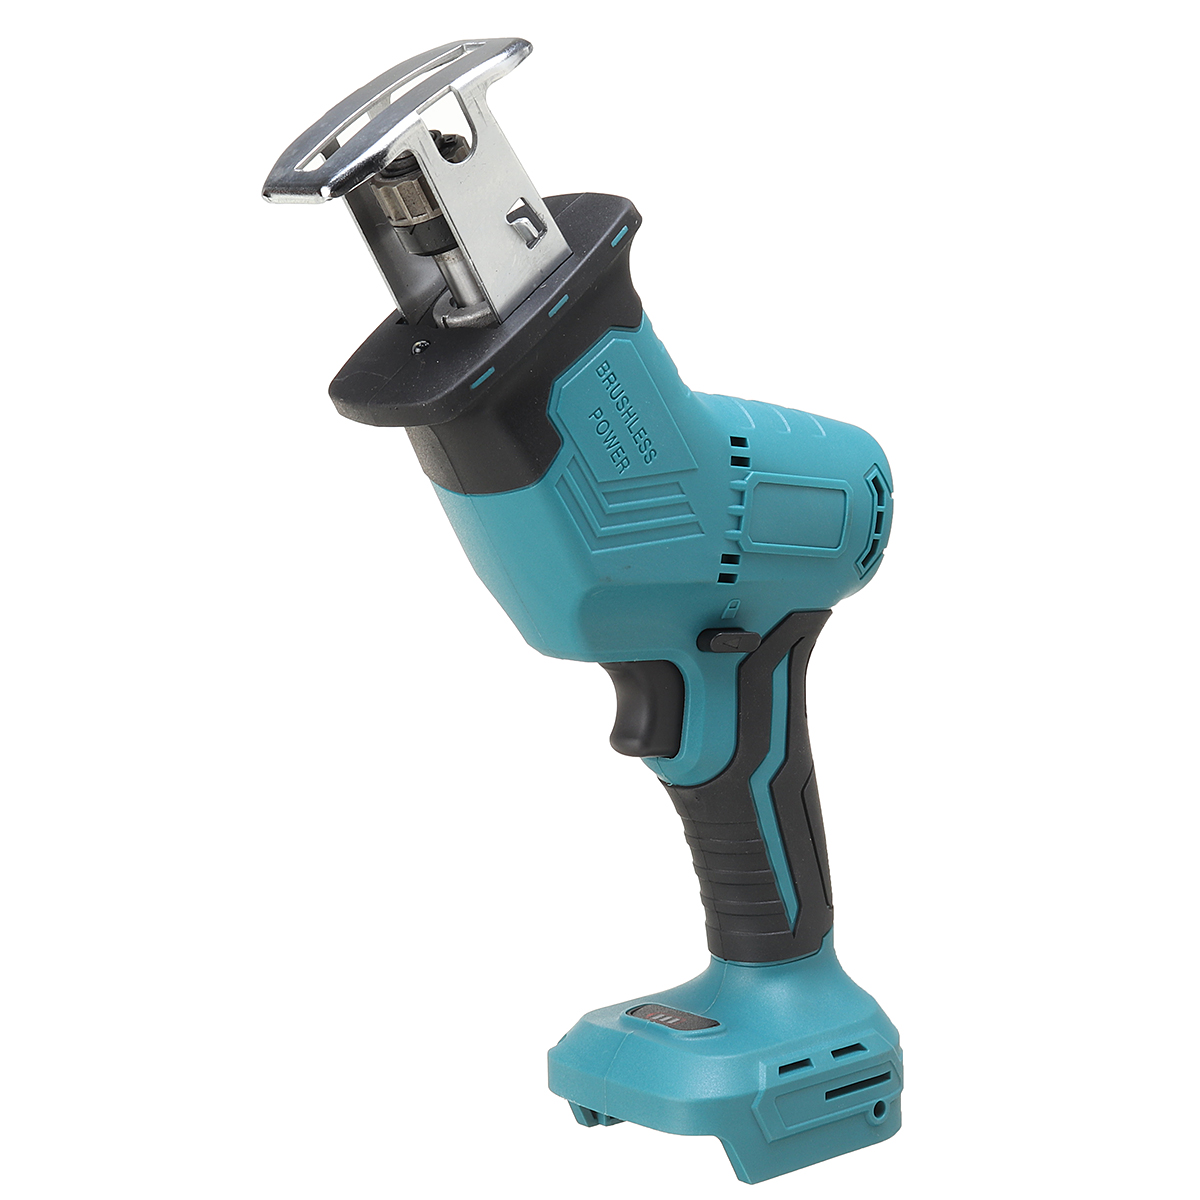 Rechargeable-Reciprocating-Saw-Brushless-Electric-Saw-For-Makita-Battery-Woodworking-Wood-Plastic-Ir-1886209-5